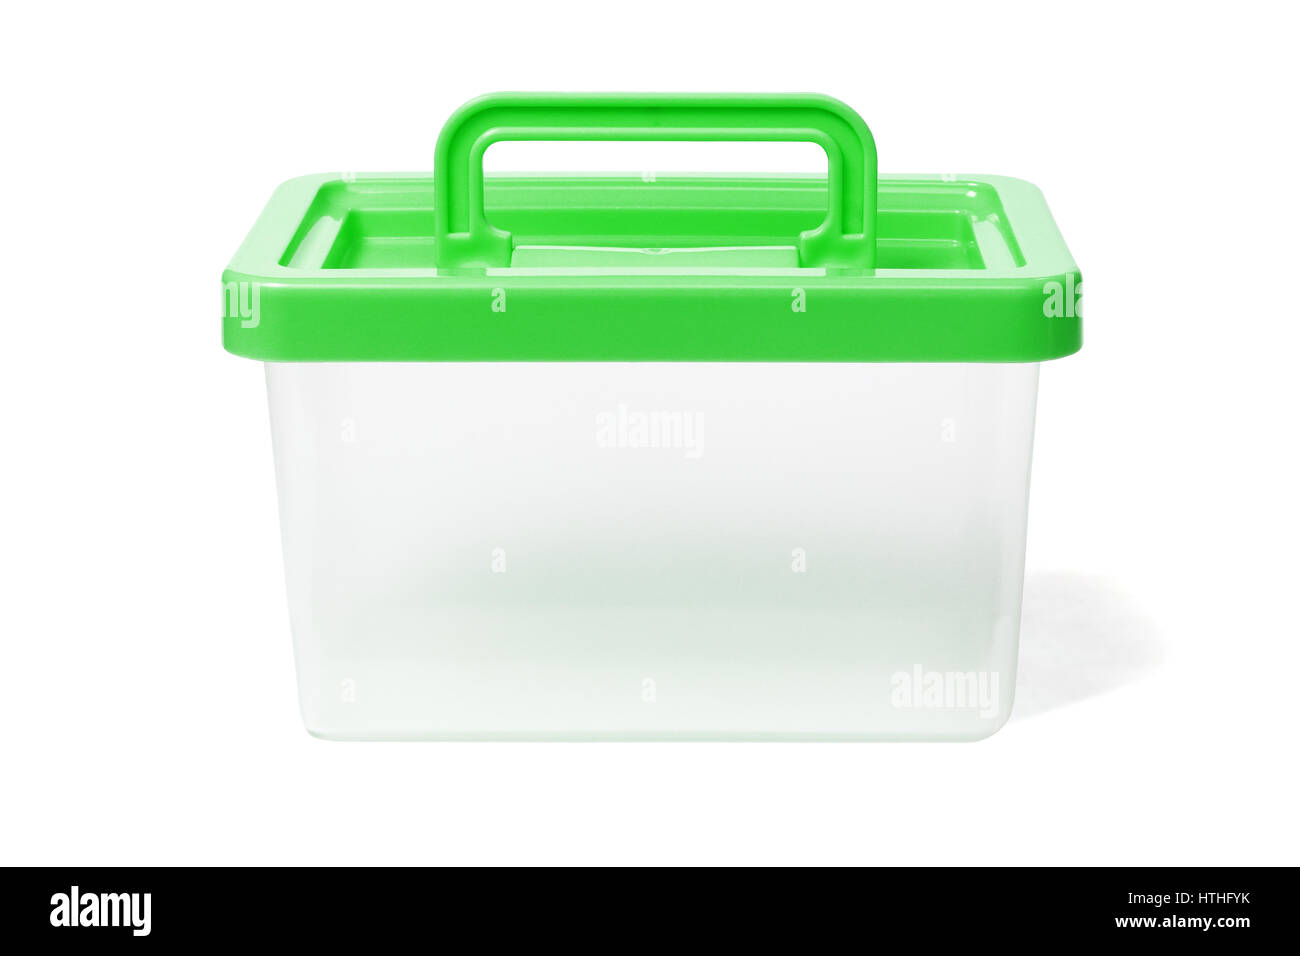 Plastic Container With Handle on White Background Stock Photo